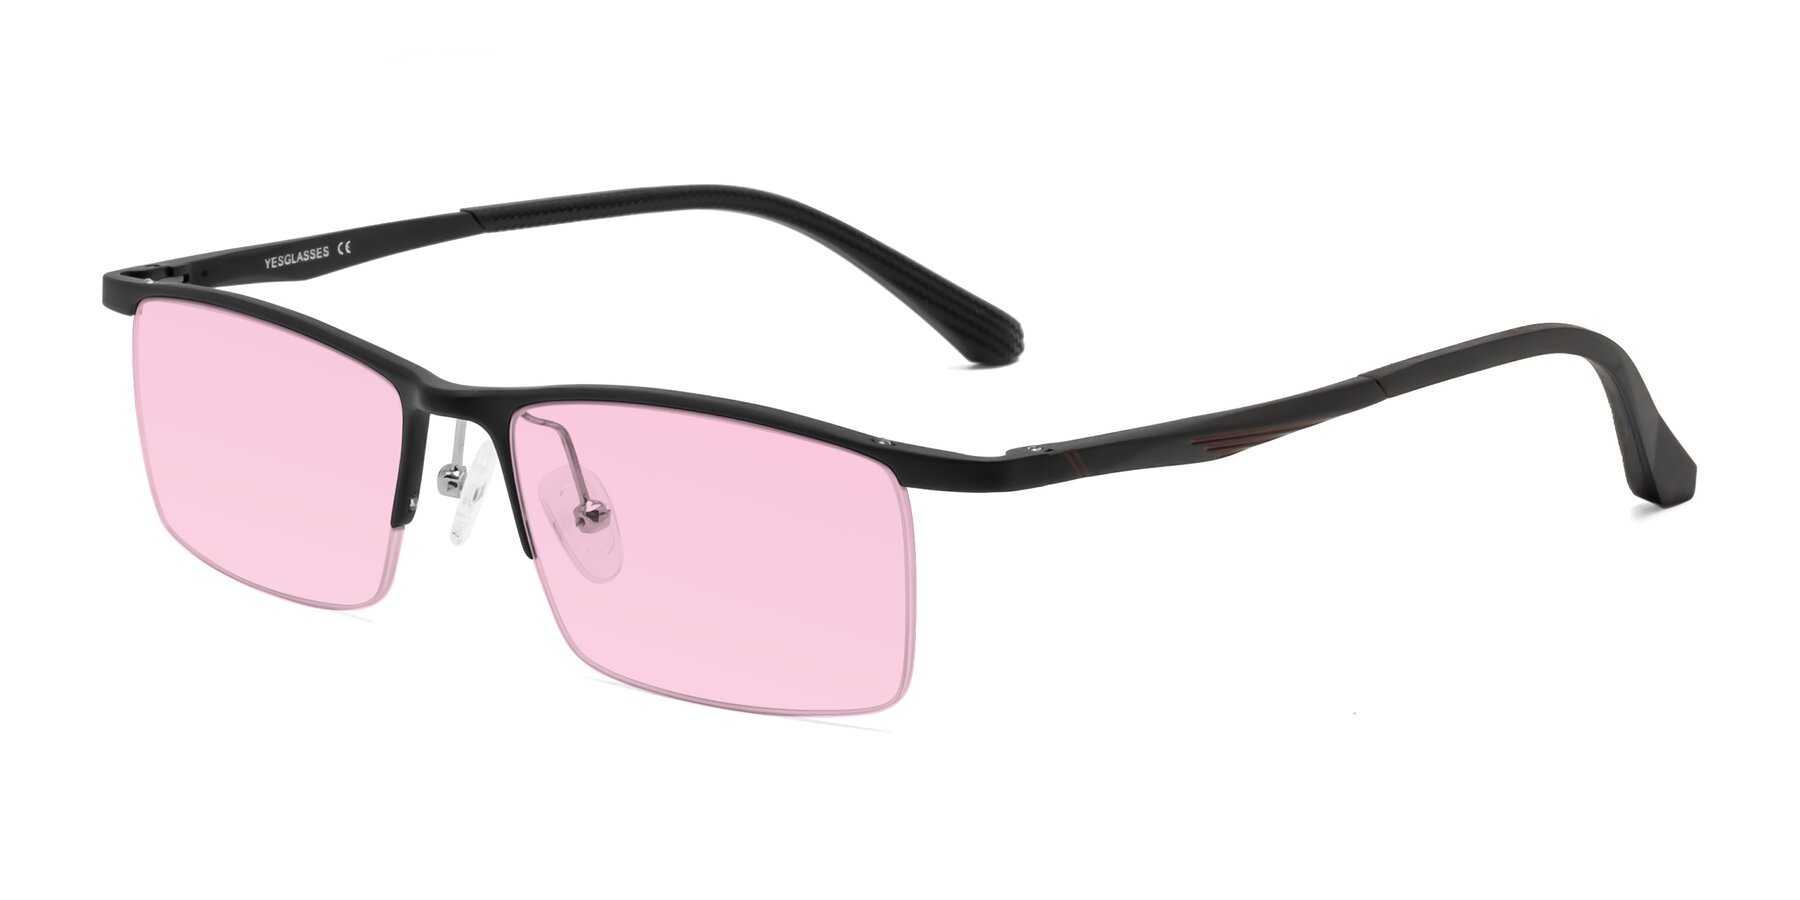 Angle of CX6236 in Black with Light Pink Tinted Lenses